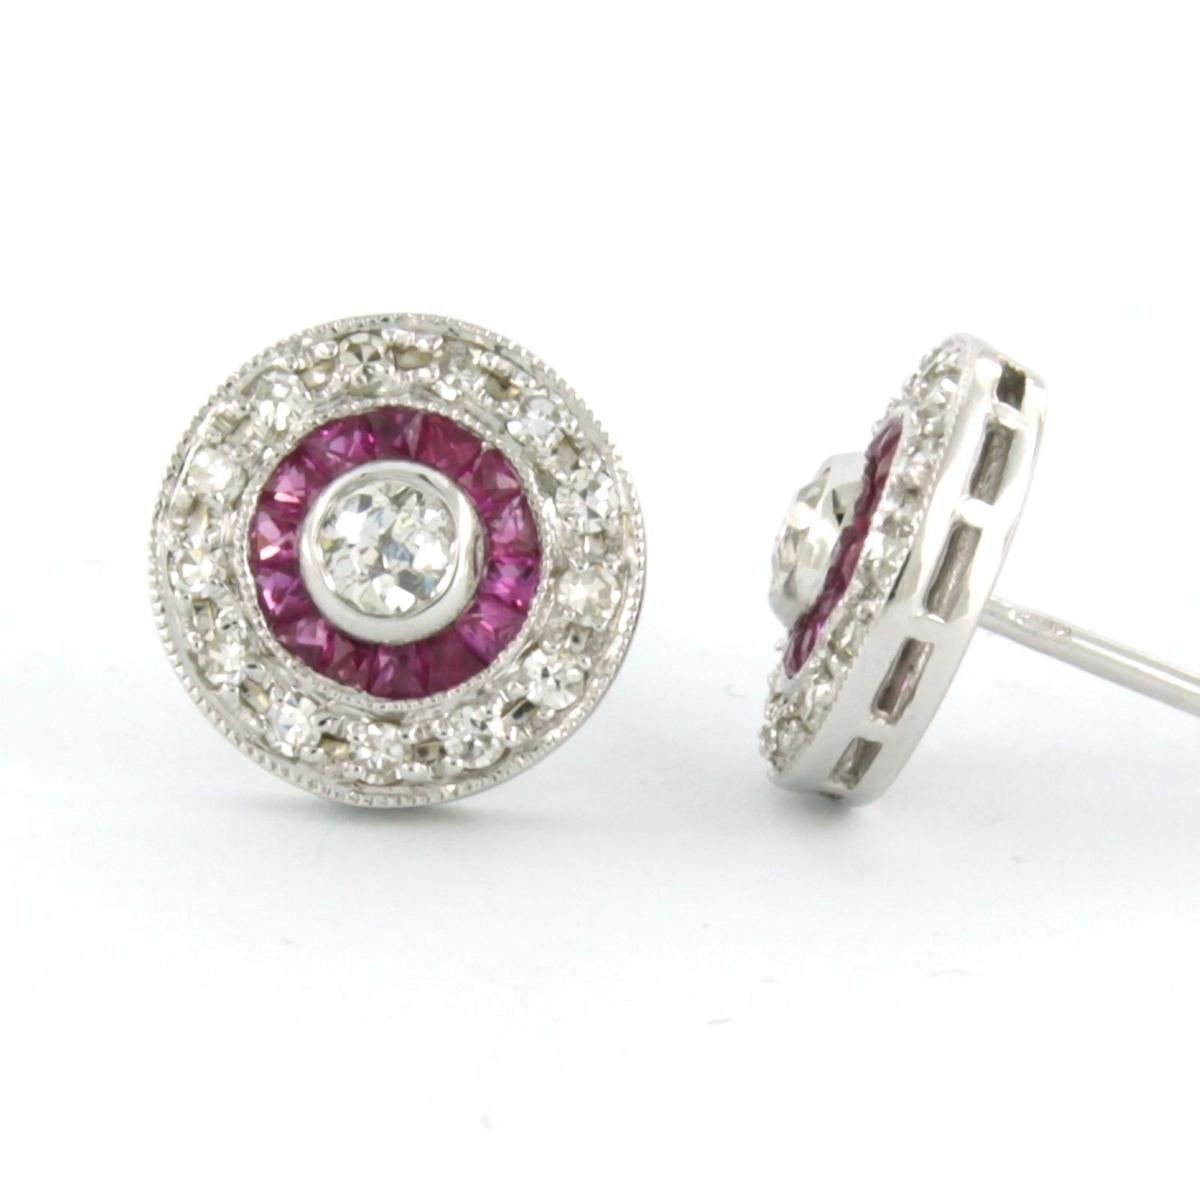 14 kt white gold earrings set with ruby 0.60 carat and old mine cut diamant and single cut diamond total 0.53 carat - F/G - VS/SI

detailed description

The earrings are 1.1 cm wide

weight: 3.5 grams

occupied with :

- 24 x 1.8 mm princess cut